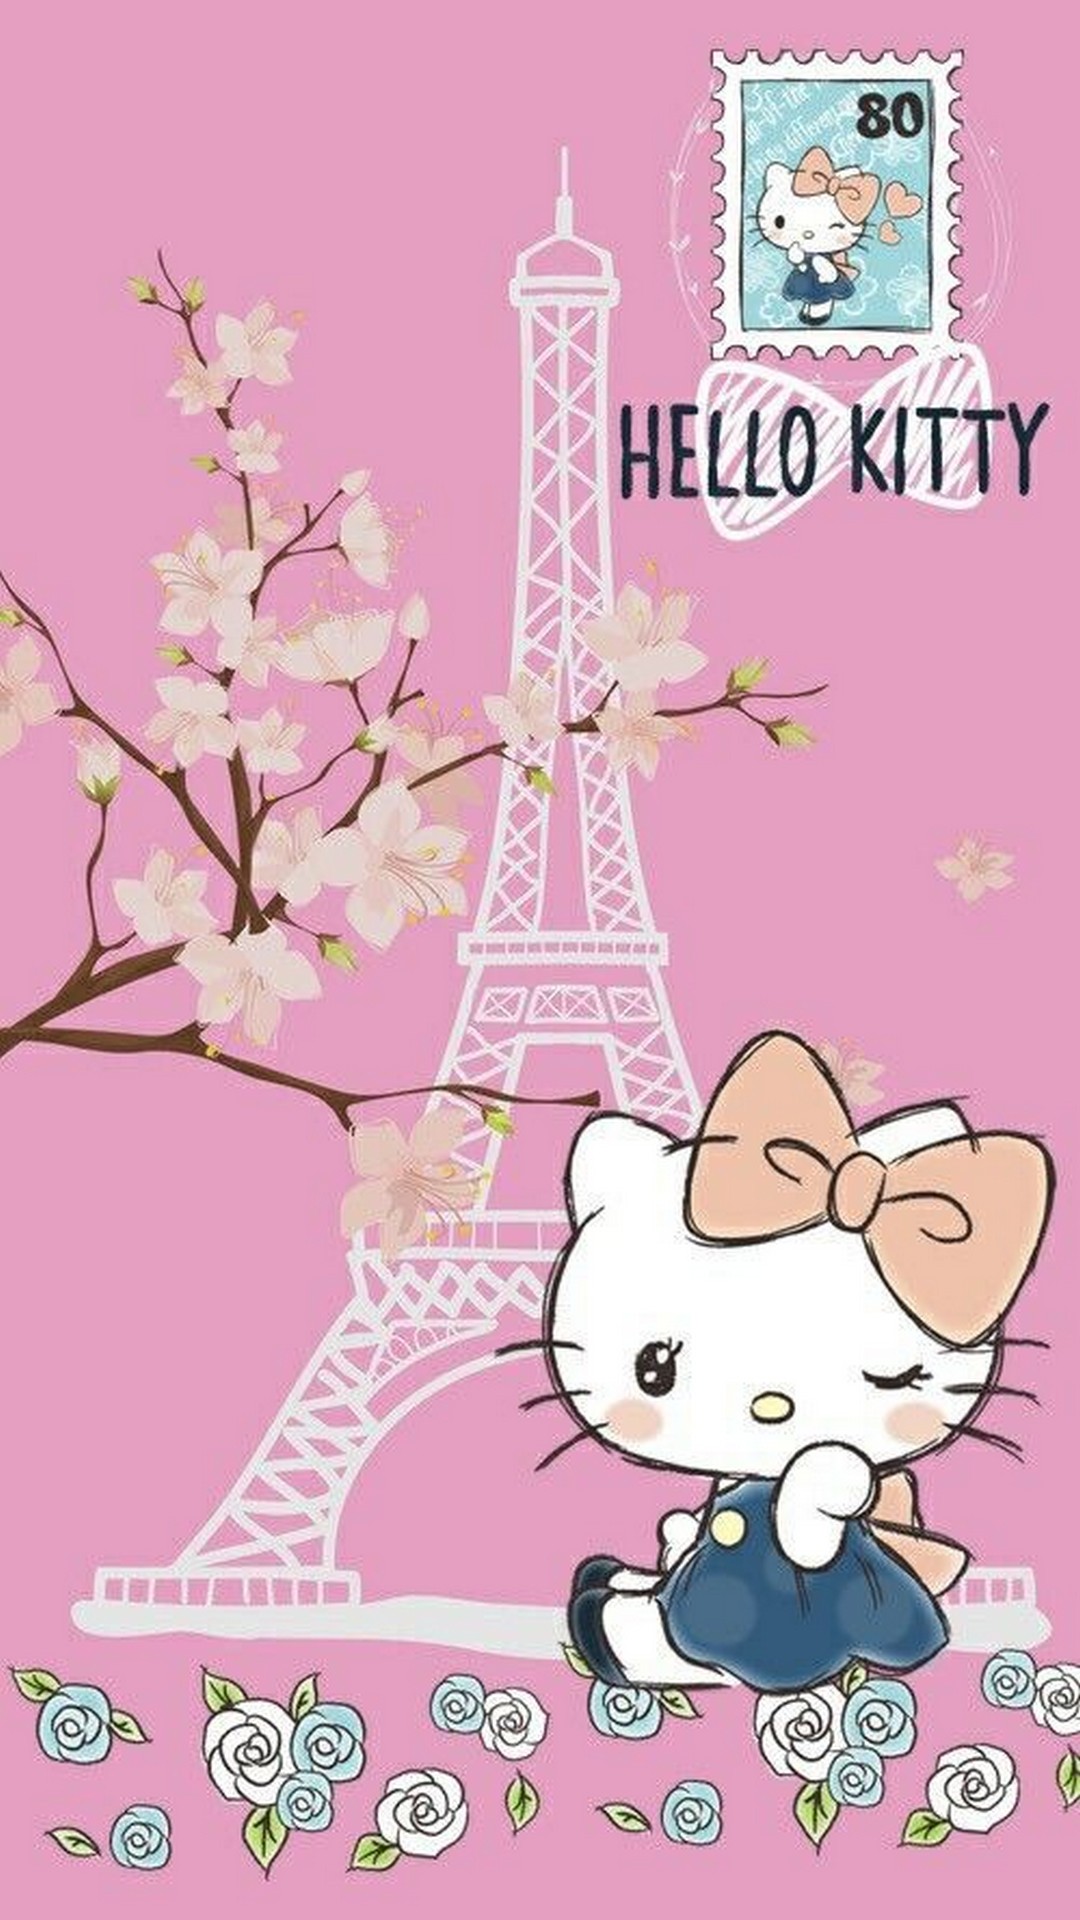 Android Wallpaper Hello Kitty Images With Image Resolution Hello Kitty 1080x1920 Wallpaper Teahub Io